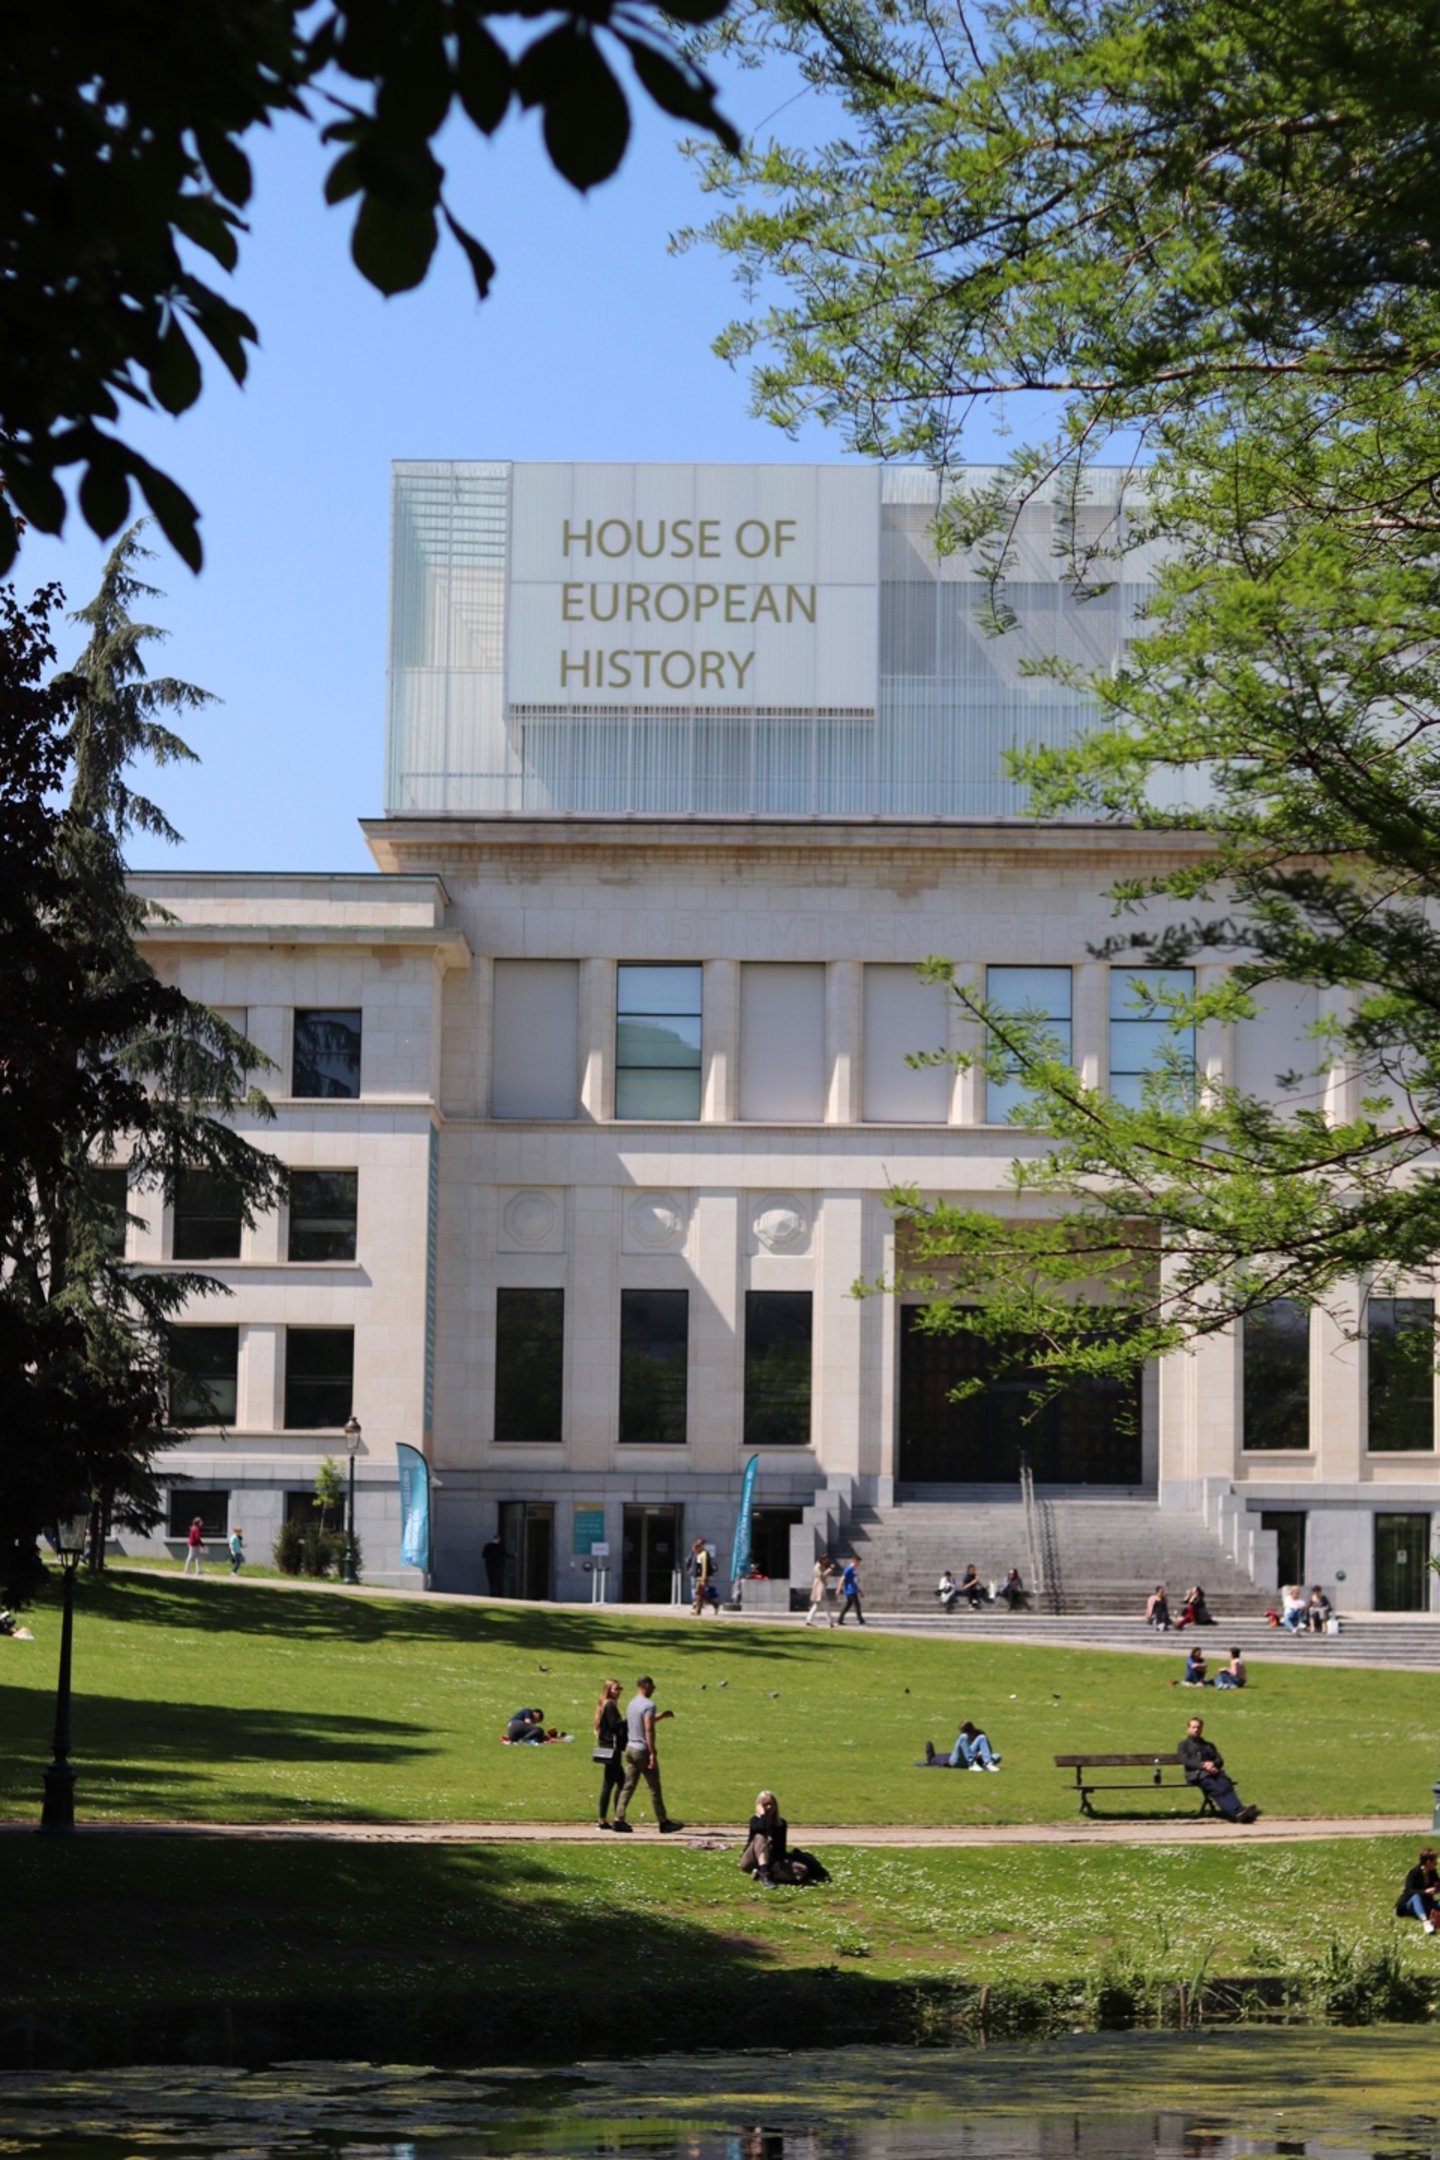 Outside view of the House of European History